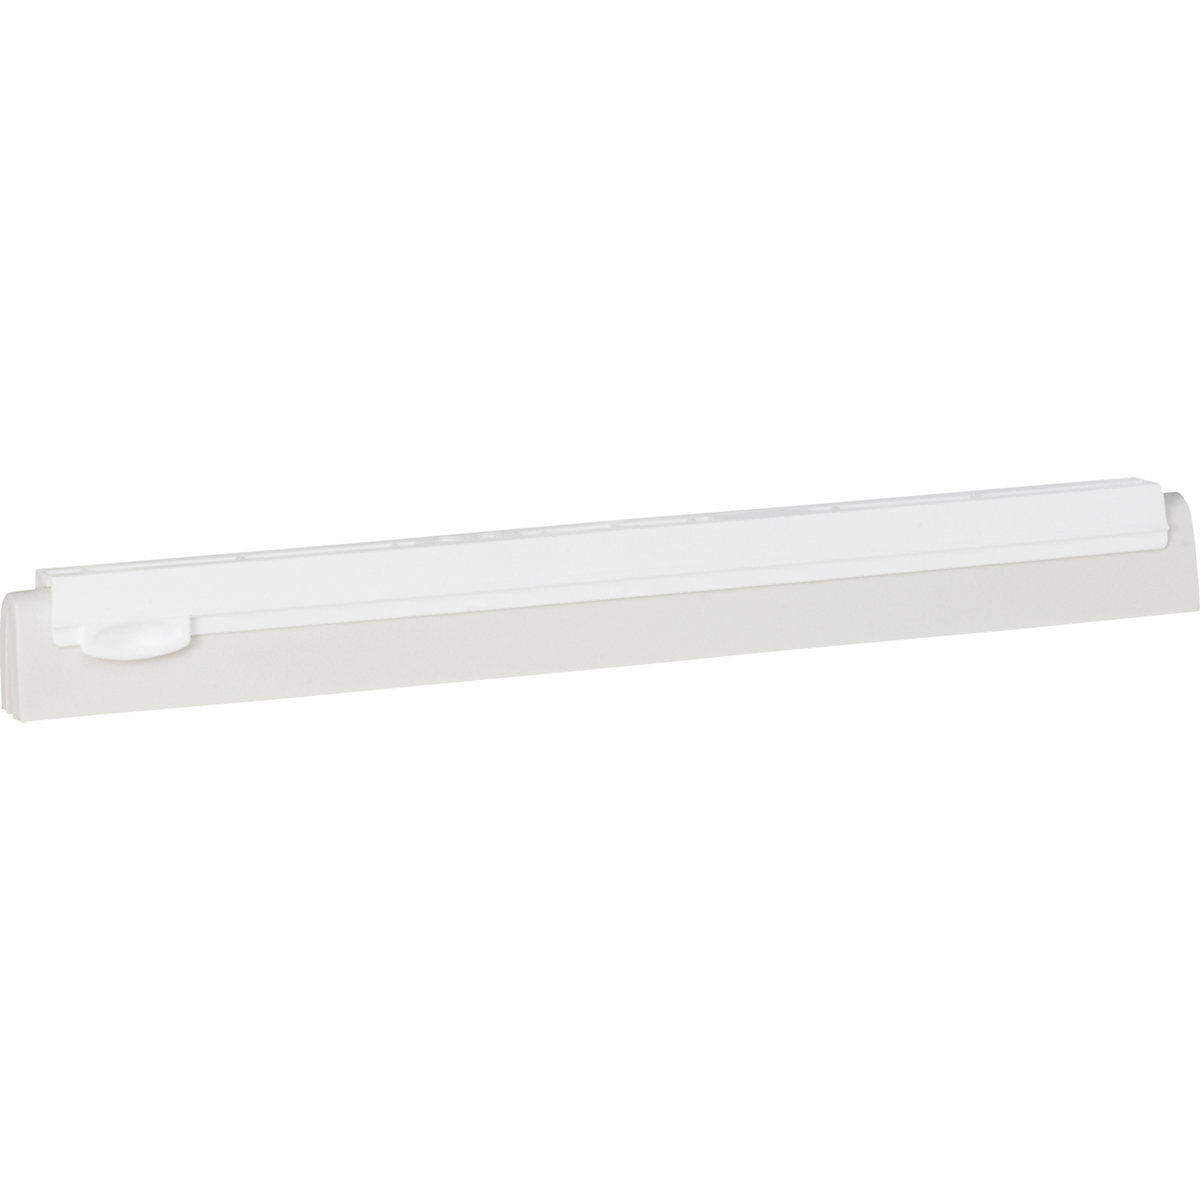 Replacement cartridge for wiper – Vikan, length 400 mm, pack of 20, white-4